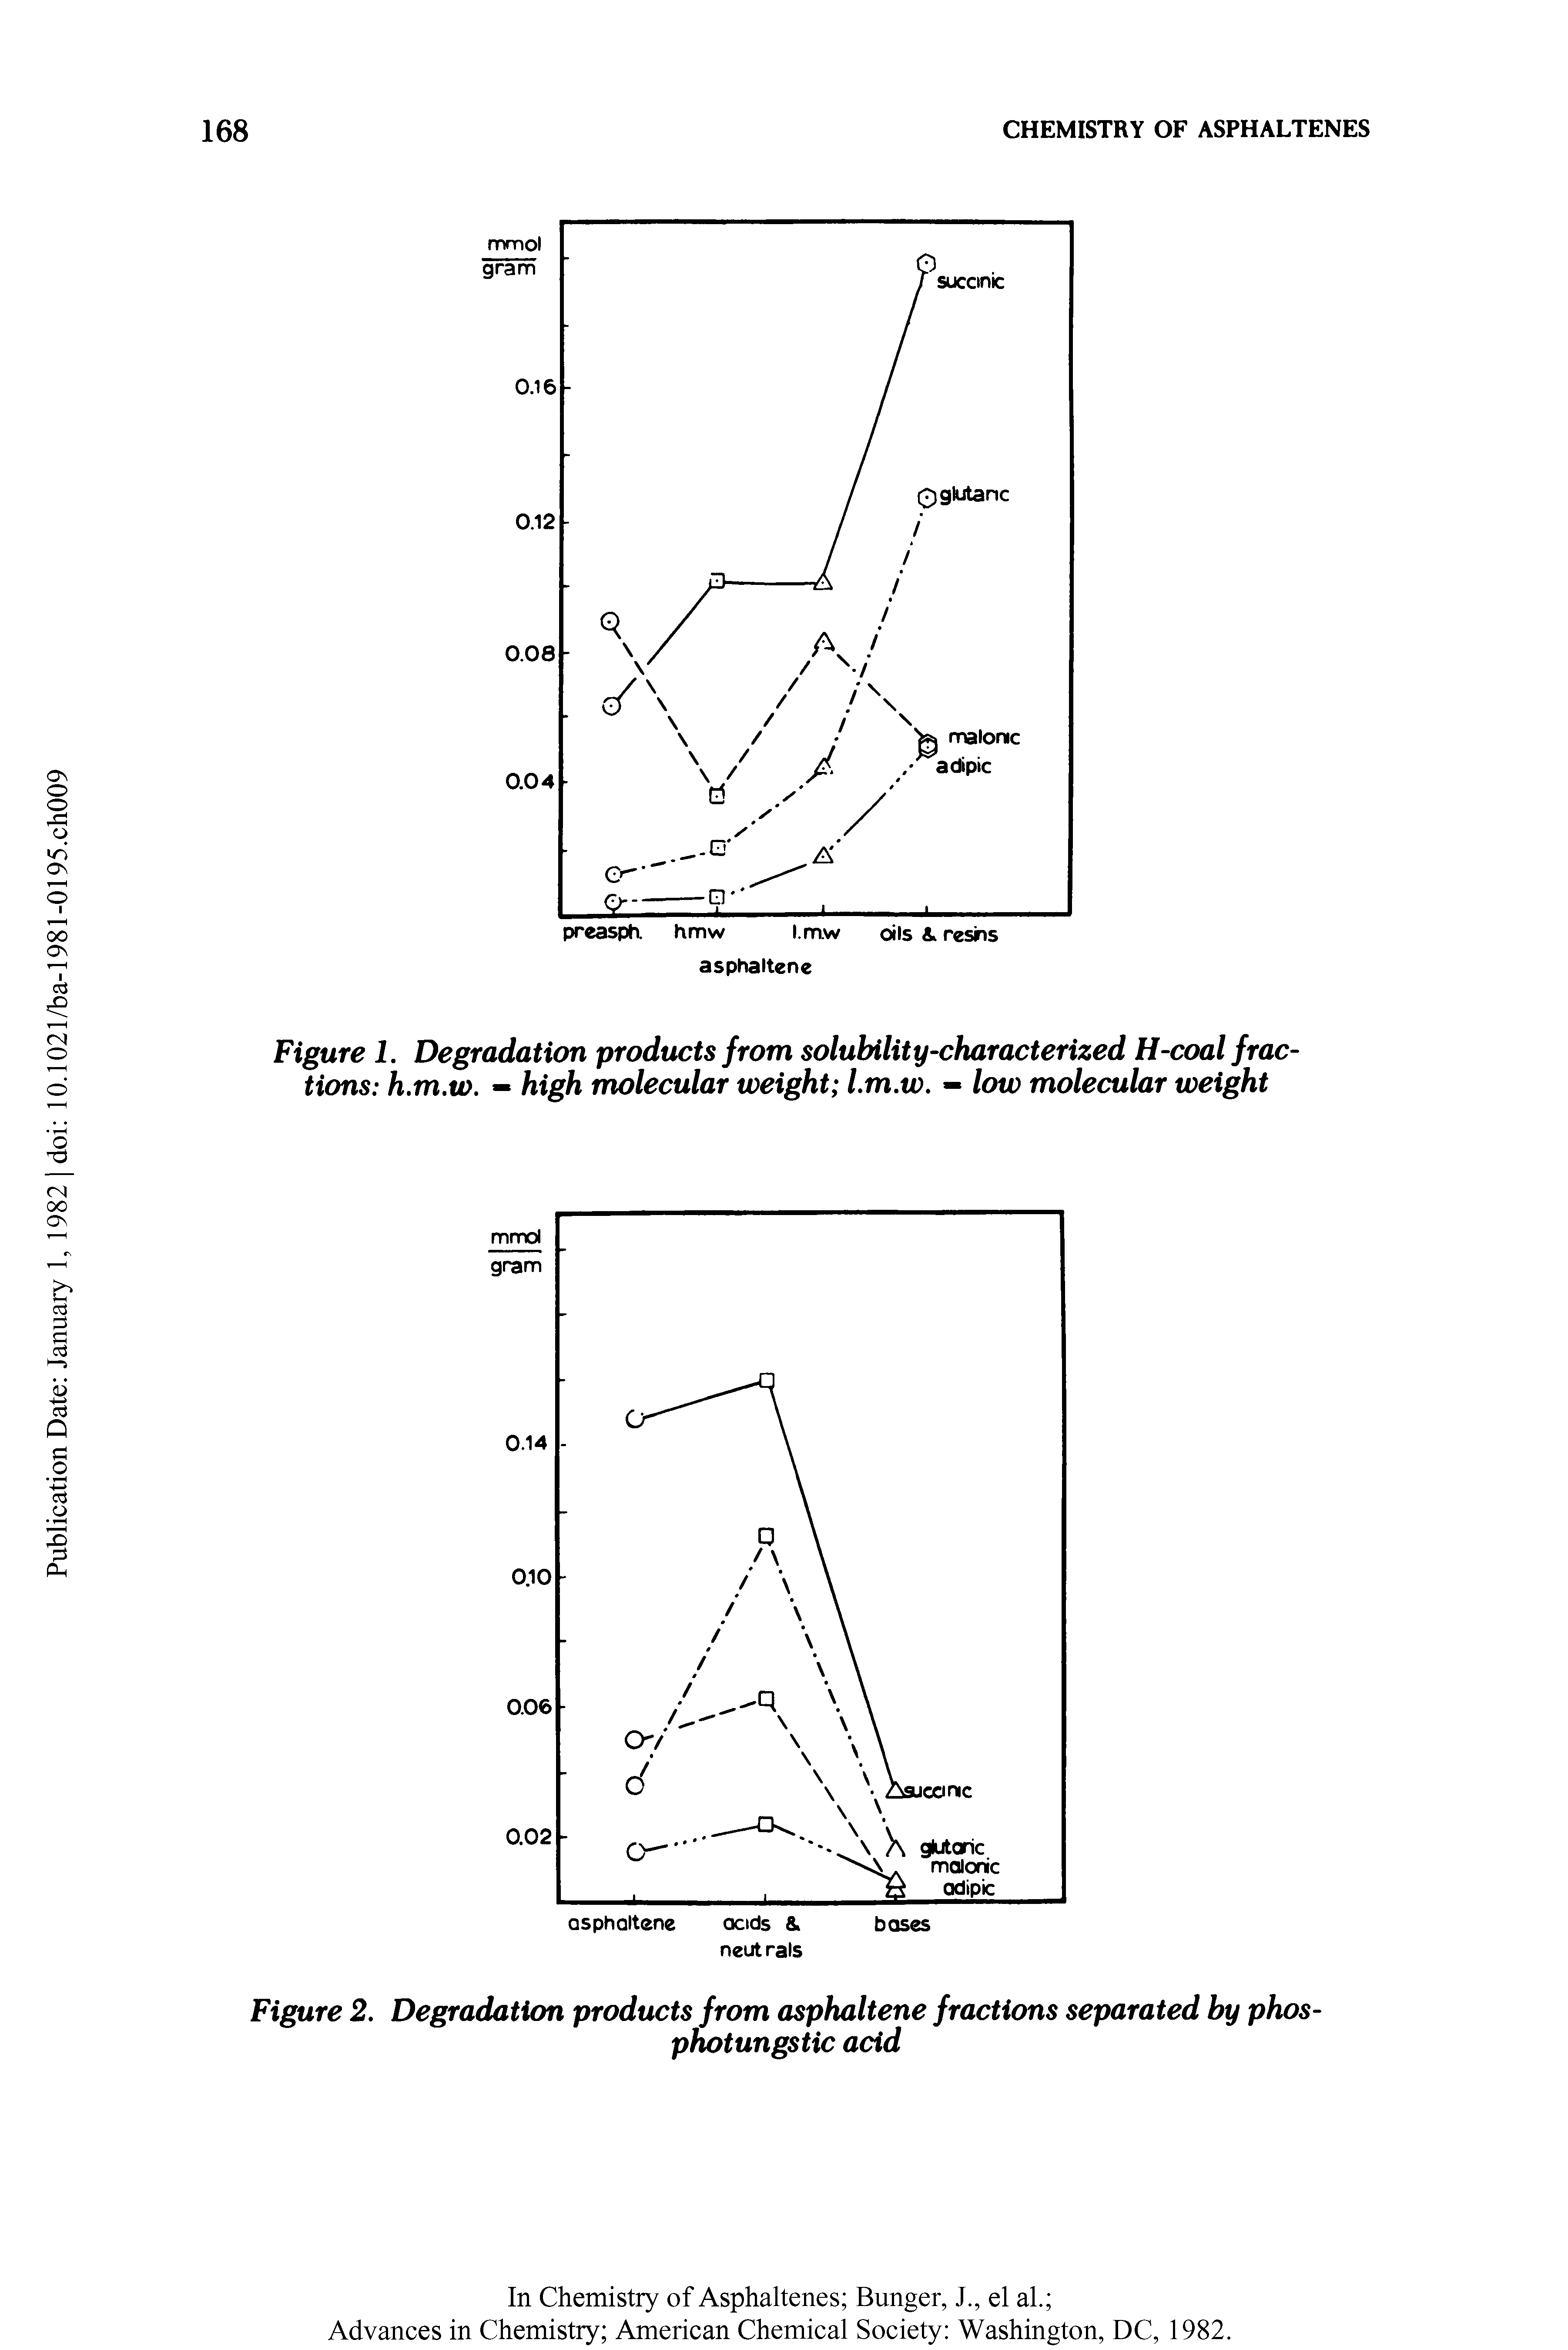 Figure 2. Degradation products from asphaltene fractions separated by phos-...